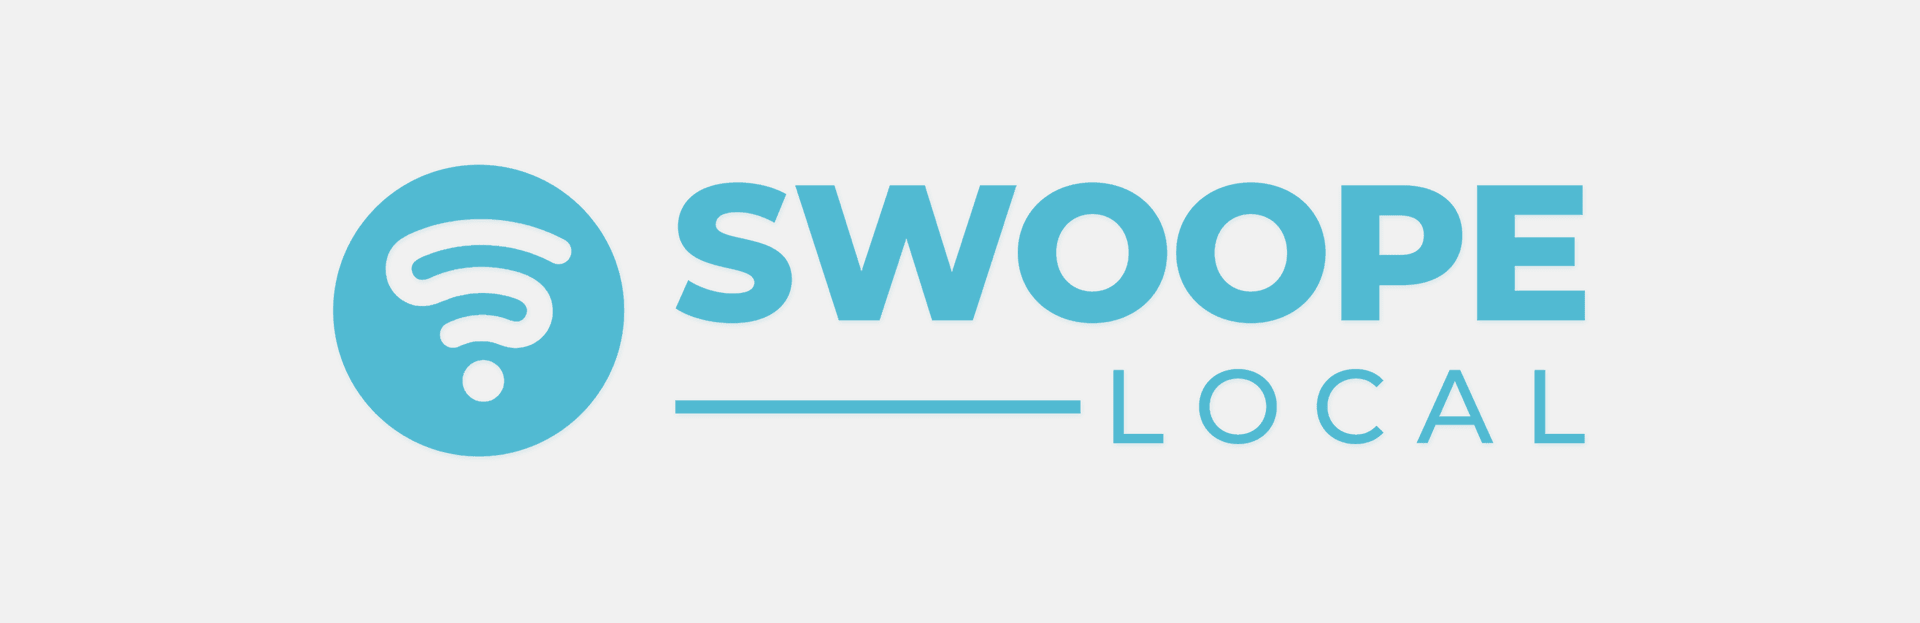 Swoope-Local